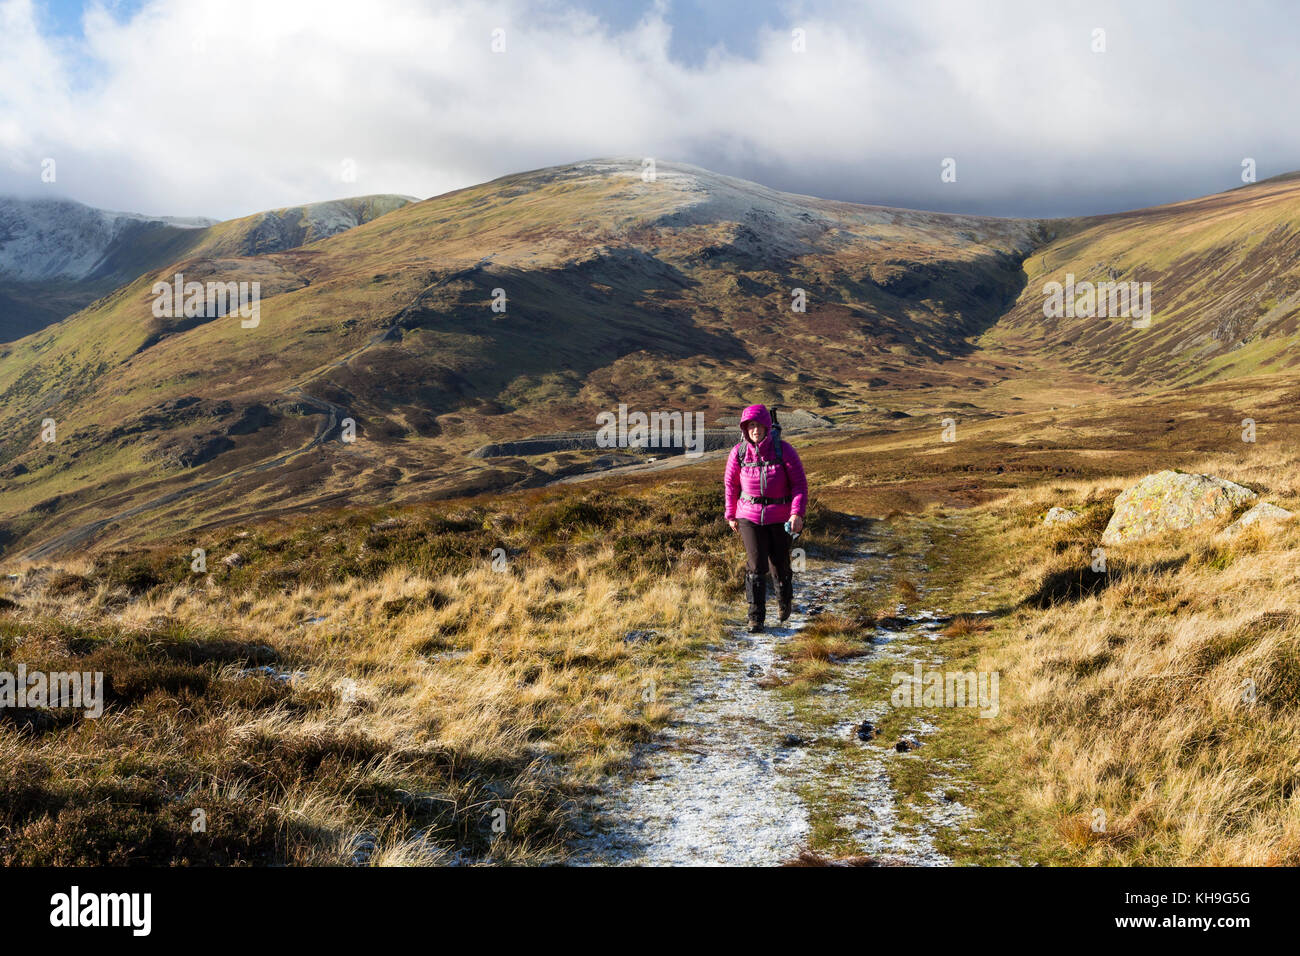 Walker Ascending Sheffield Pike with the Mountain of Raise Behind, Lake District, Cumbria UK. Stock Photo